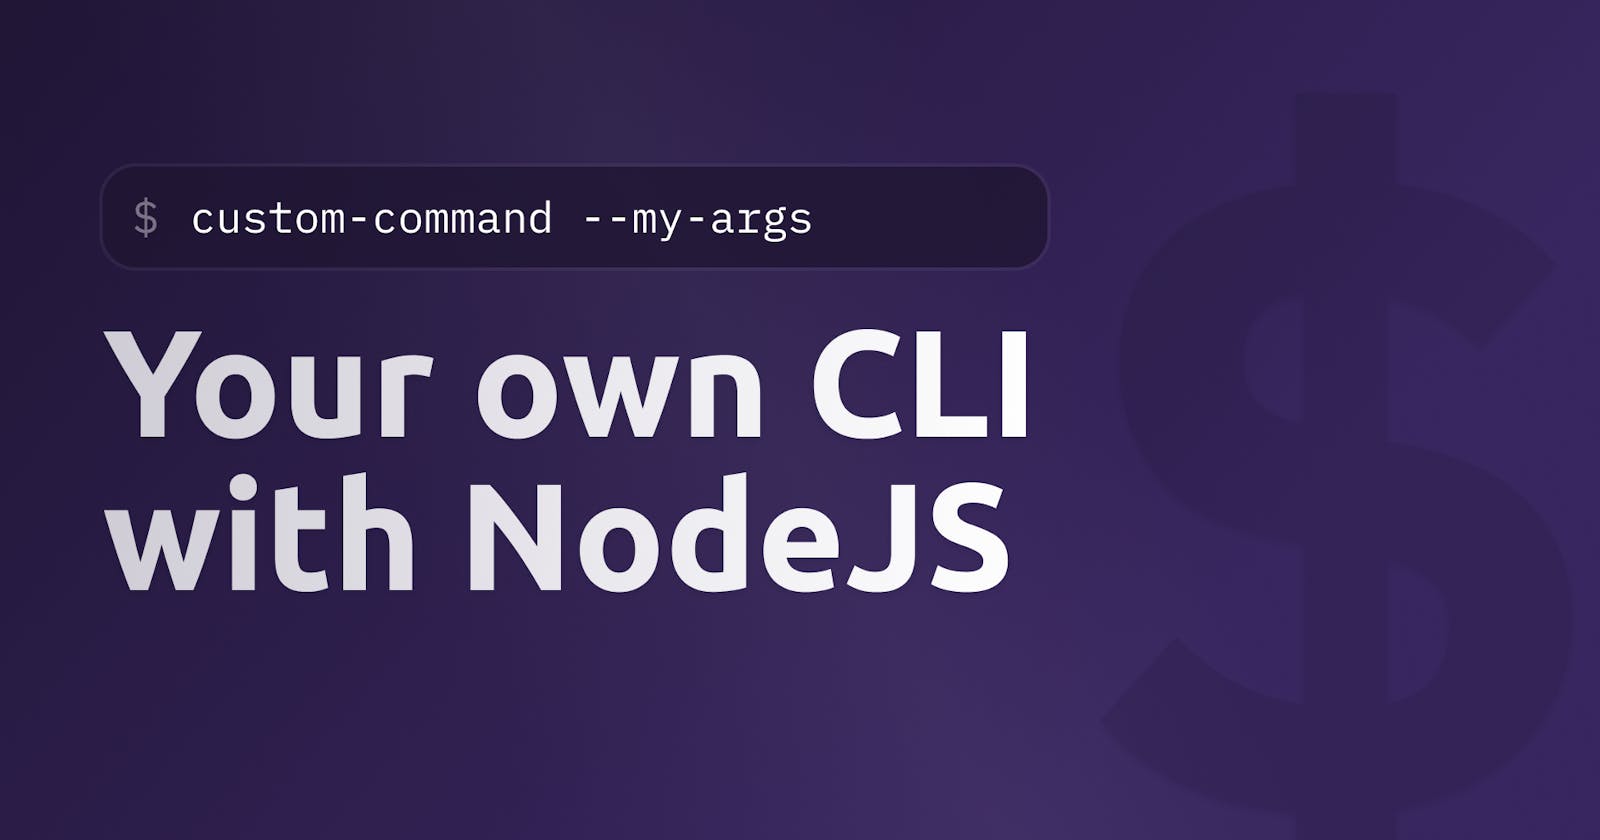 How to build your own CLI tool with NodeJS